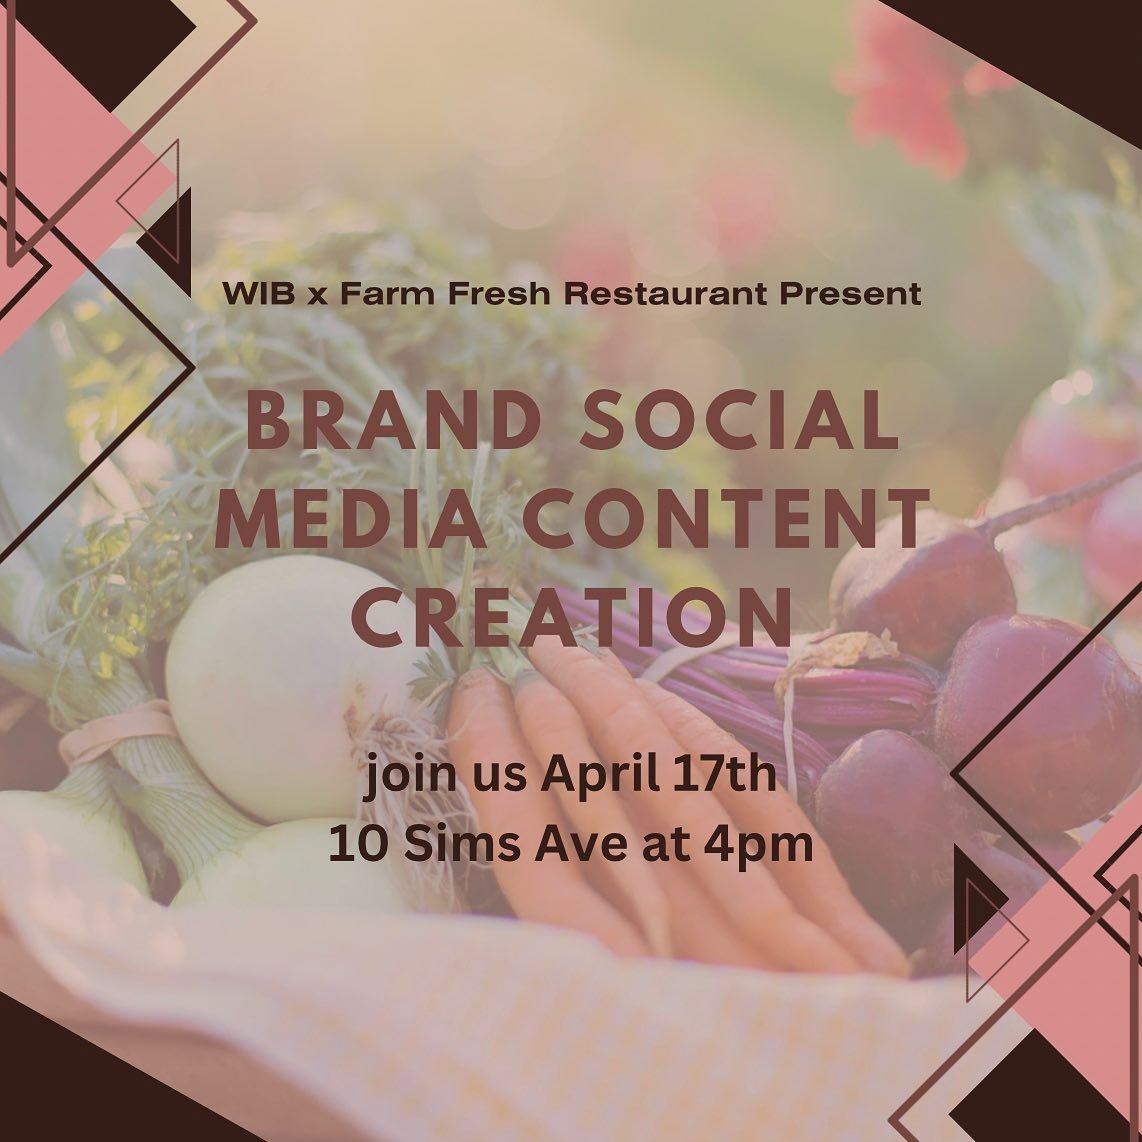 Interested in marketing or content creation? Want to learn how to create engaging content? Do you love food? If so, we invite you to volunteer at Farm Fresh on Wednesday, April 17th, and Thursday, April 18th! We will be creating social media content 